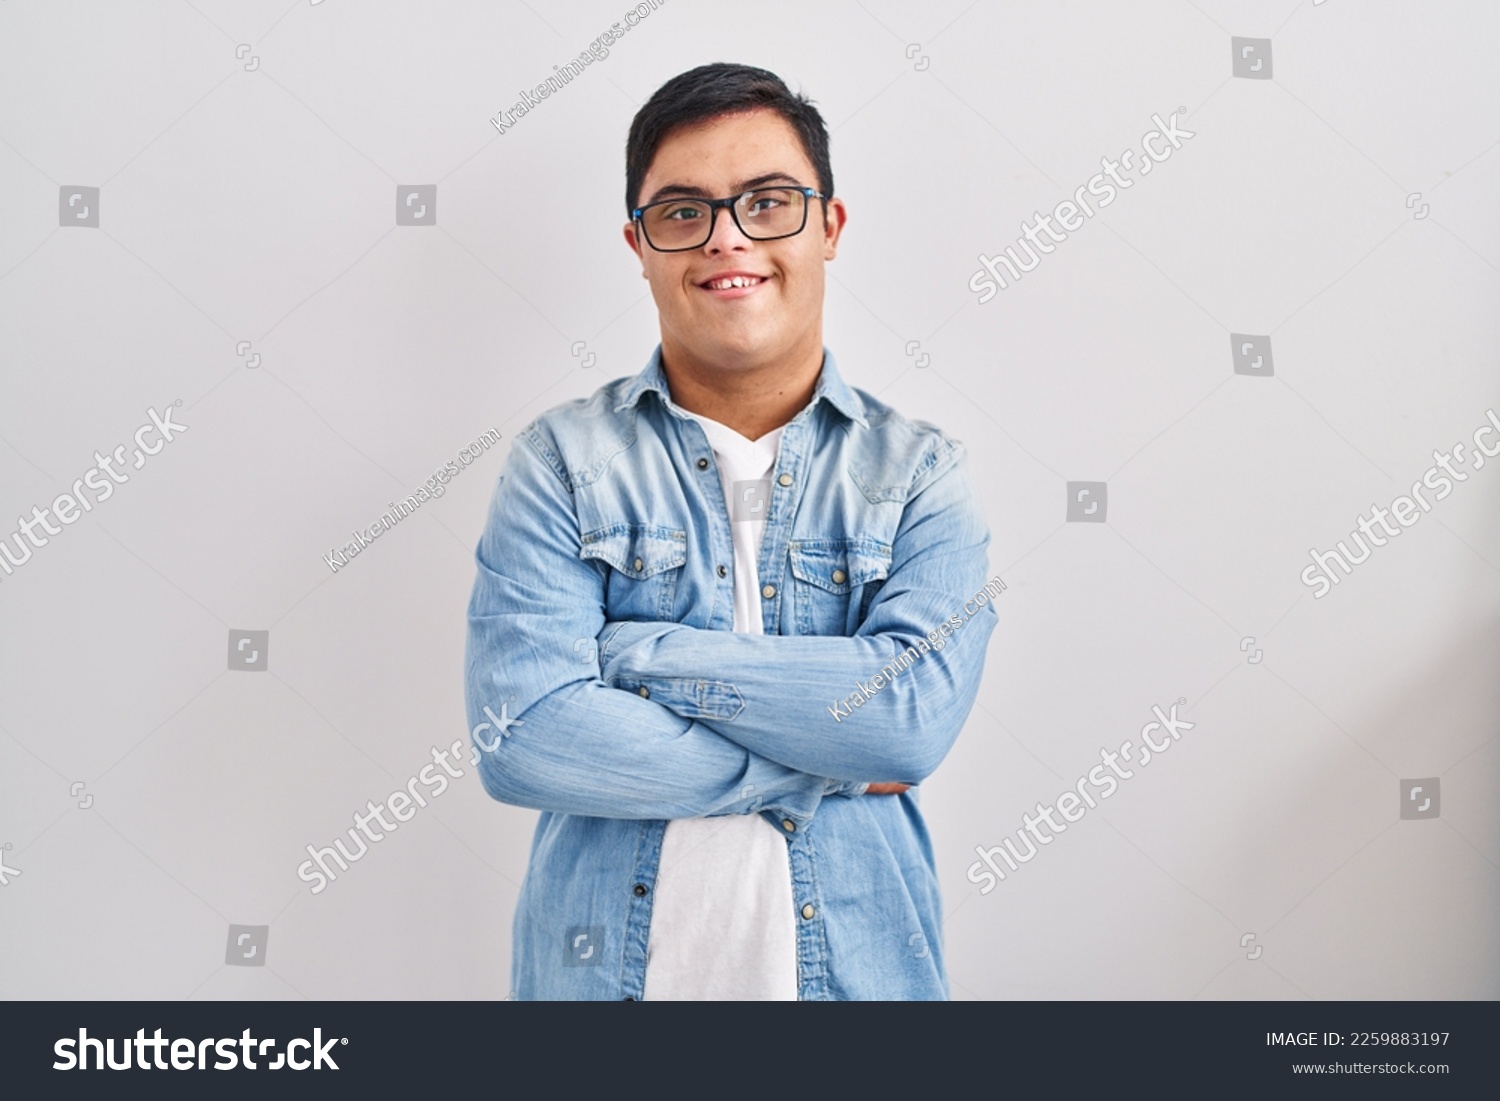 Young hispanic man with down syndrome wearing casual denim jacket over white background happy face smiling with crossed arms looking at the camera. positive person.  #2259883197